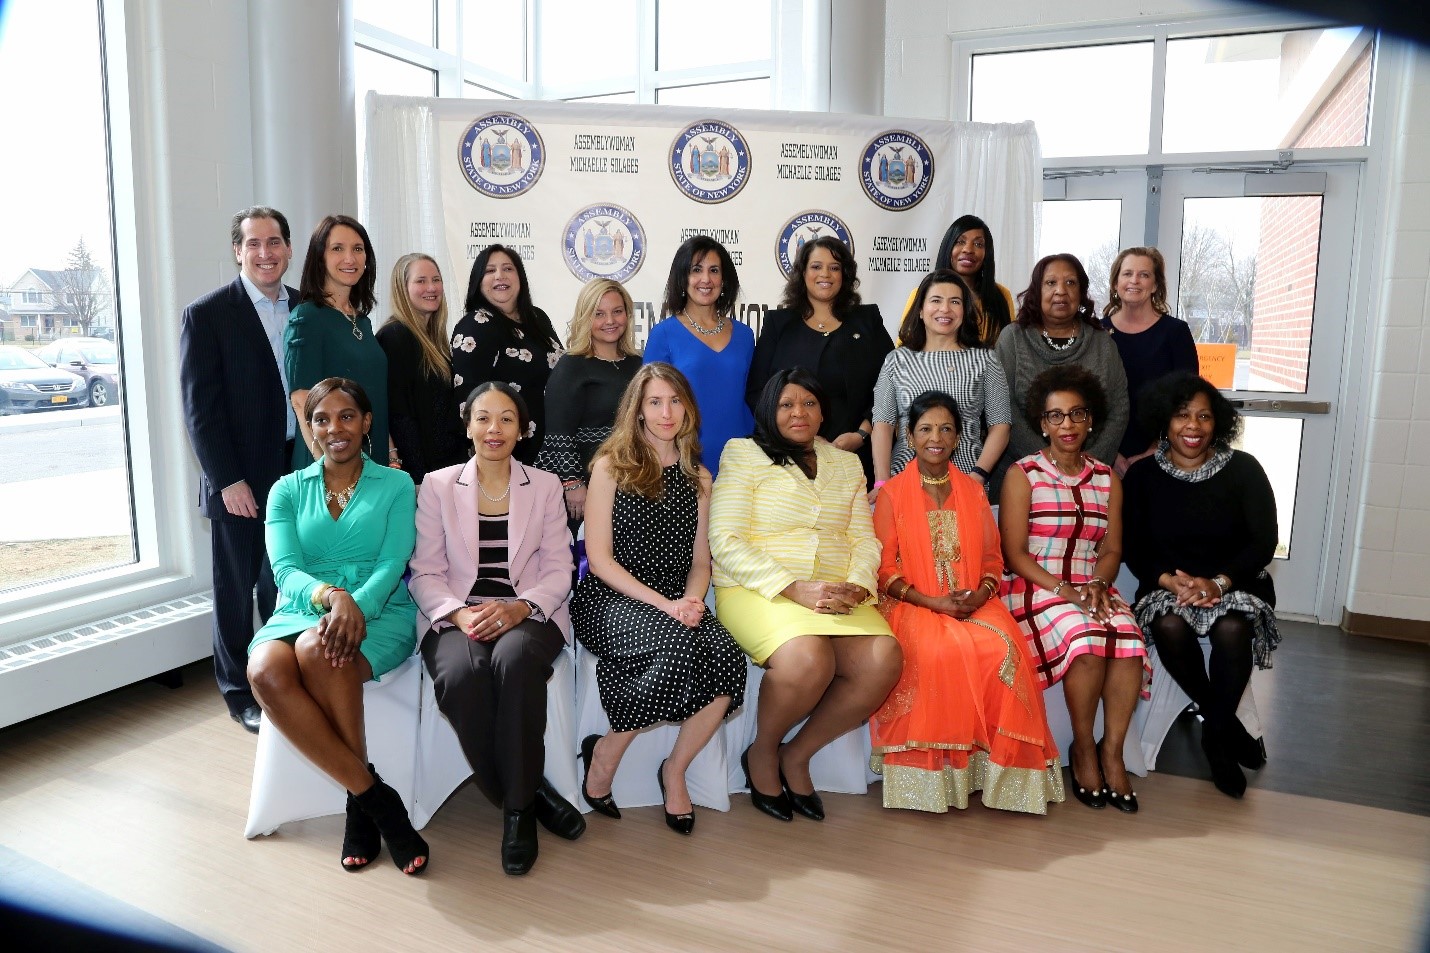 Assemblywoman Solages honors a group of the dynamic woman from the 22nd Assembly District for the 2019 Women of Distinction Ceremony at Sewanhaka High School.